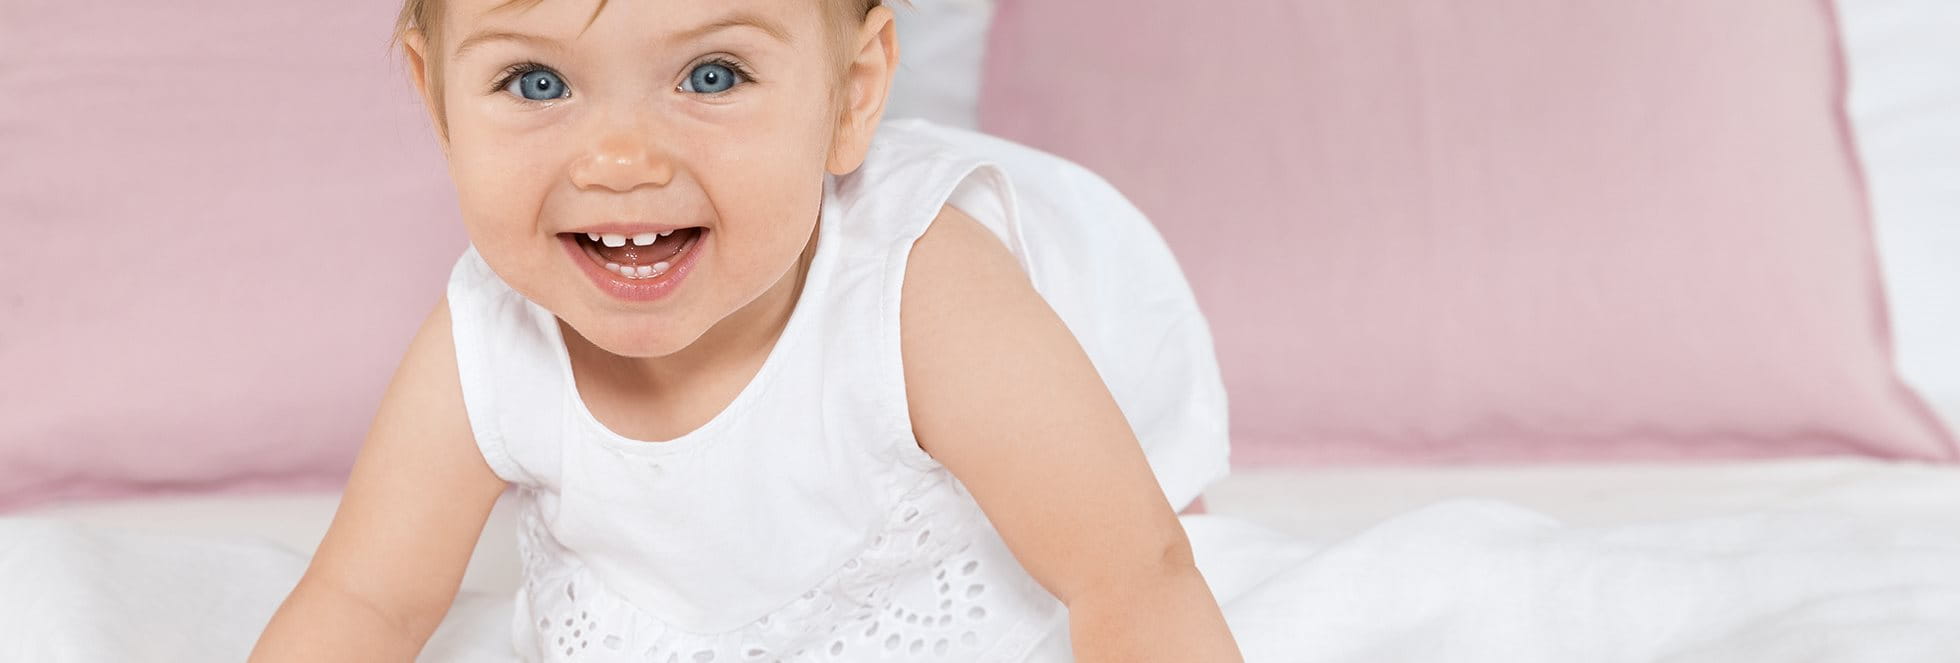 Baby in white dress smiling